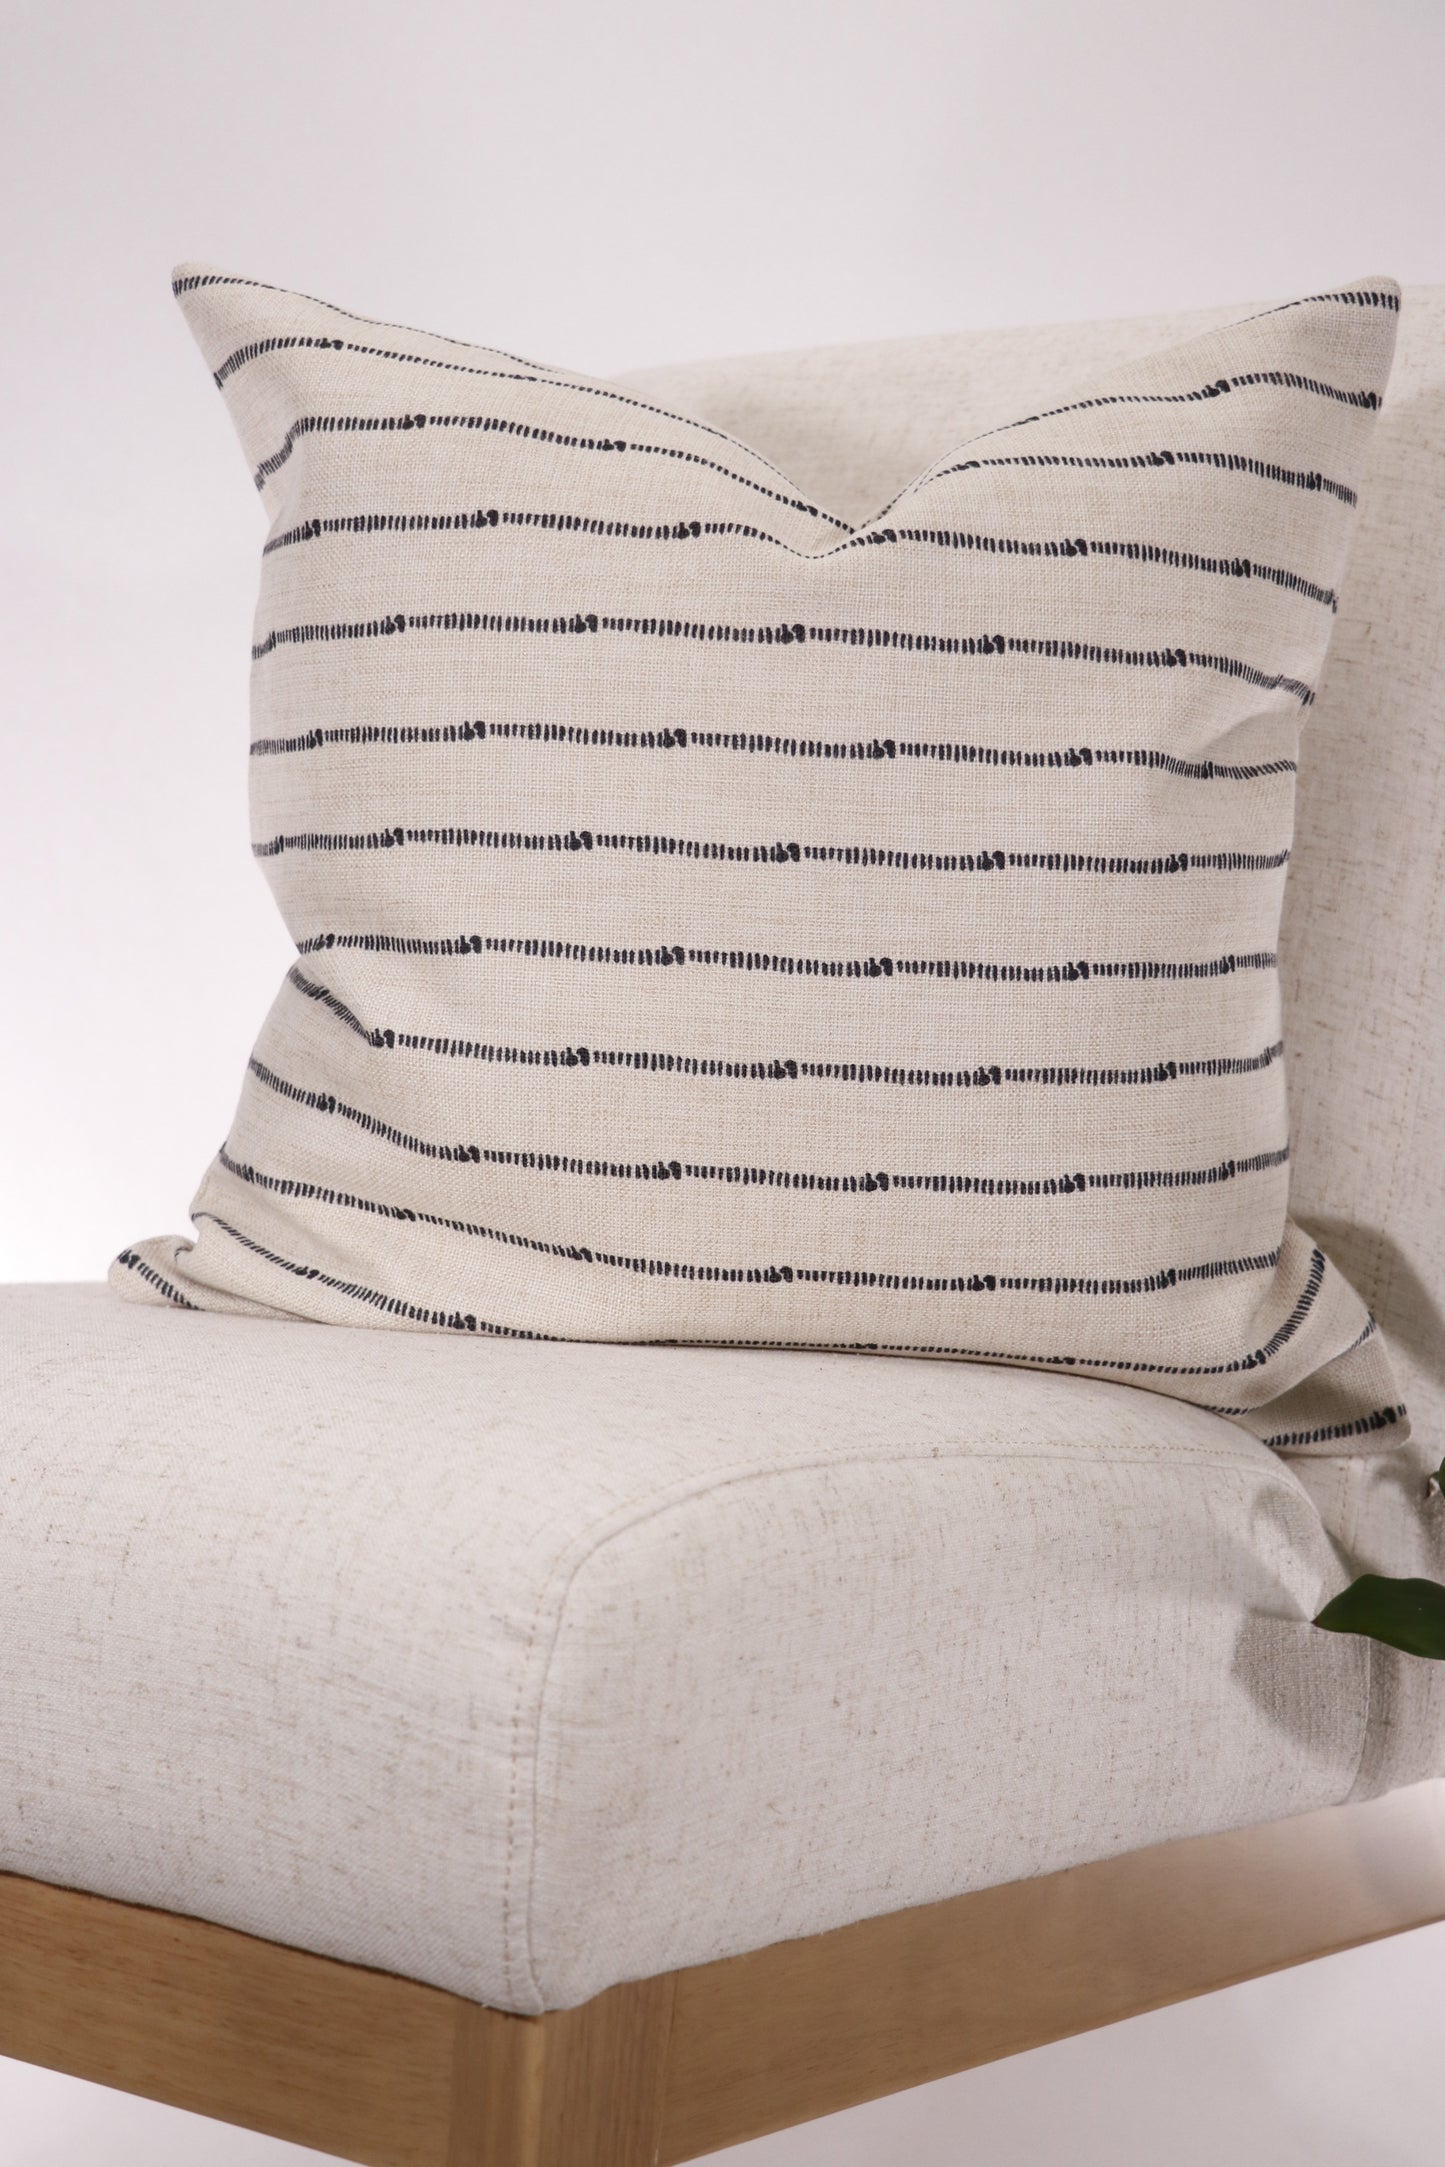 Linen Texture With Black Stripe 20x20 Pillow Cover